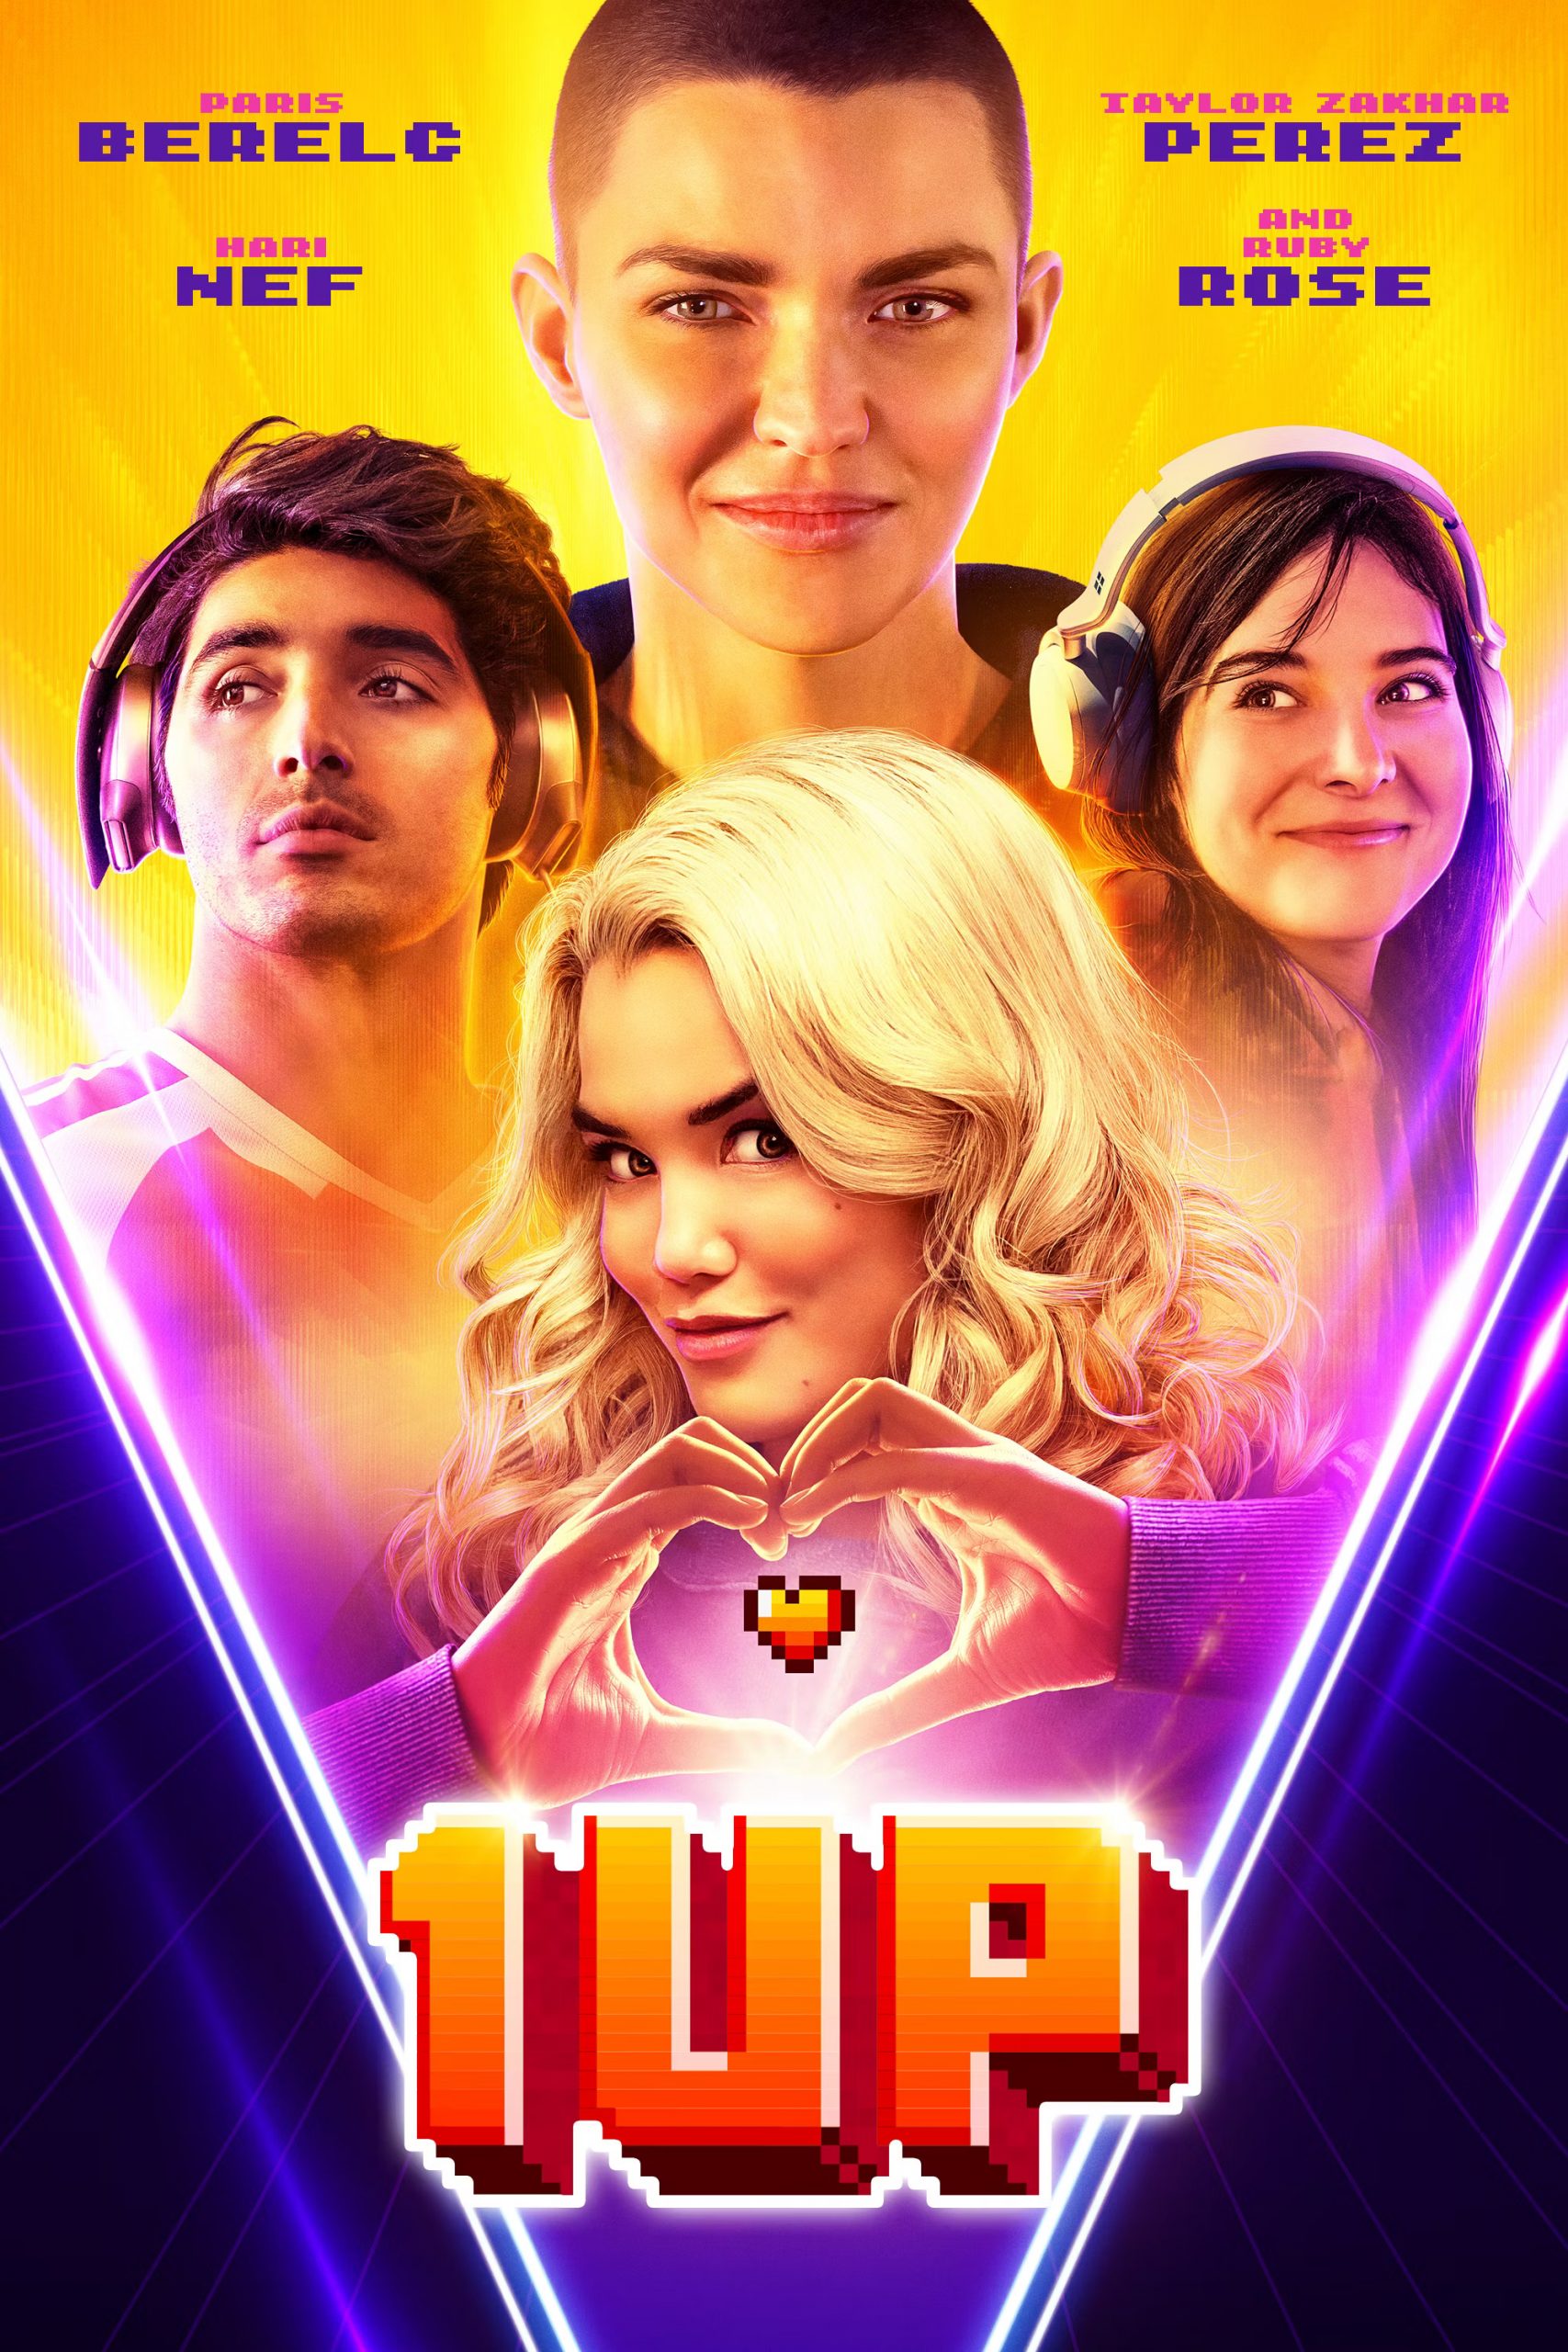 Is 1Up (2022) available on Amazon Prime